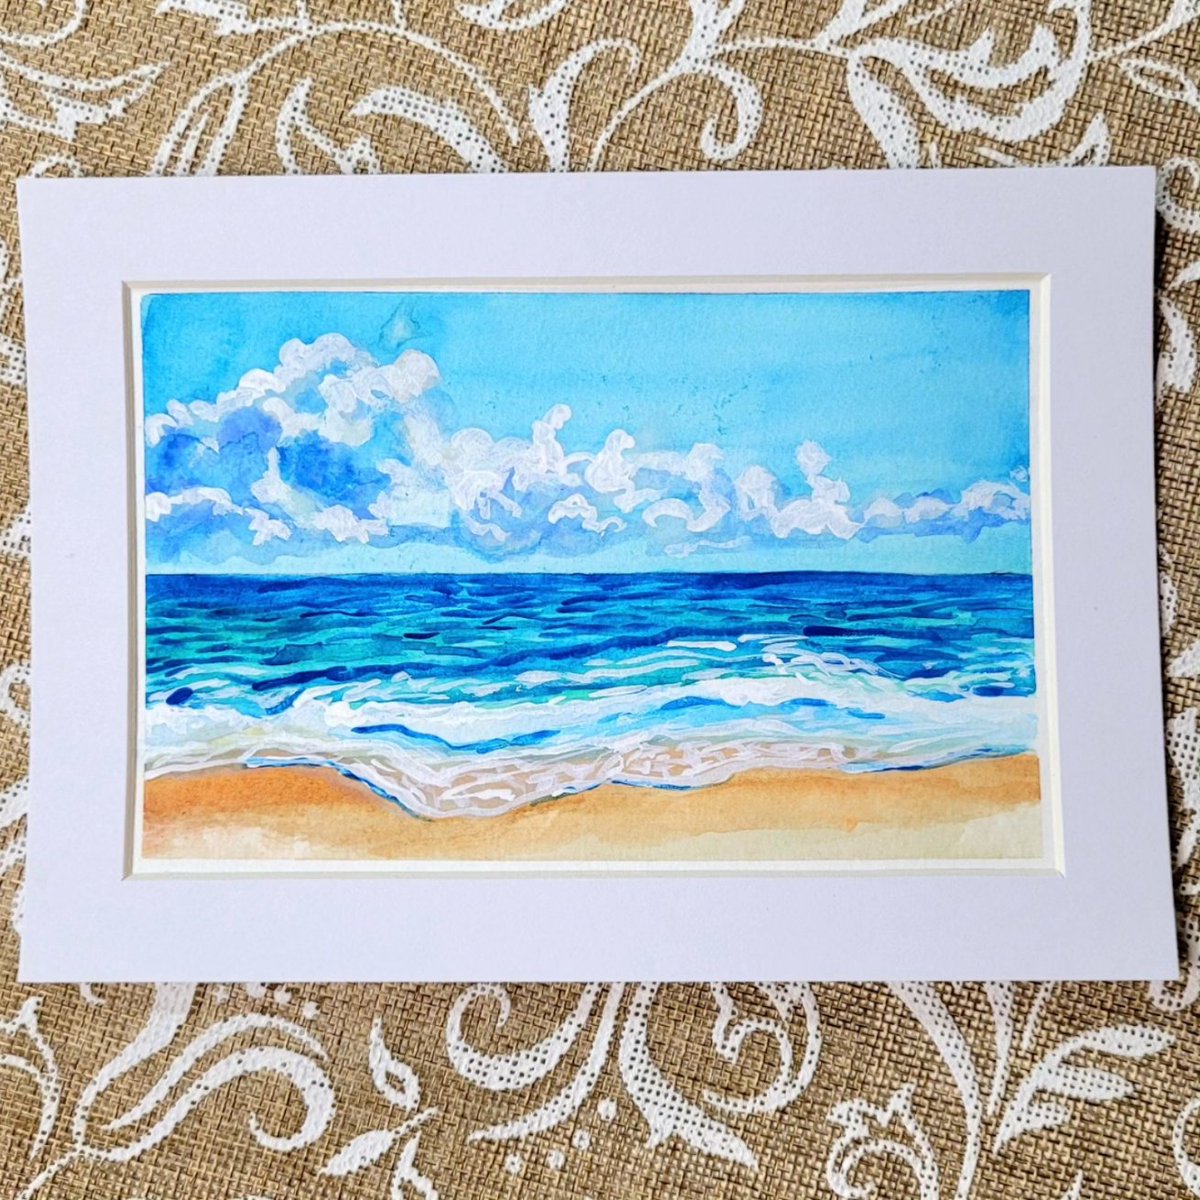 I'm ready for more summer views!
🏖
4'×6' watercolour (matted to 5'×7') available 
#beach #beachvibes #oceanlife #seascape #vacation #tropicalparadise